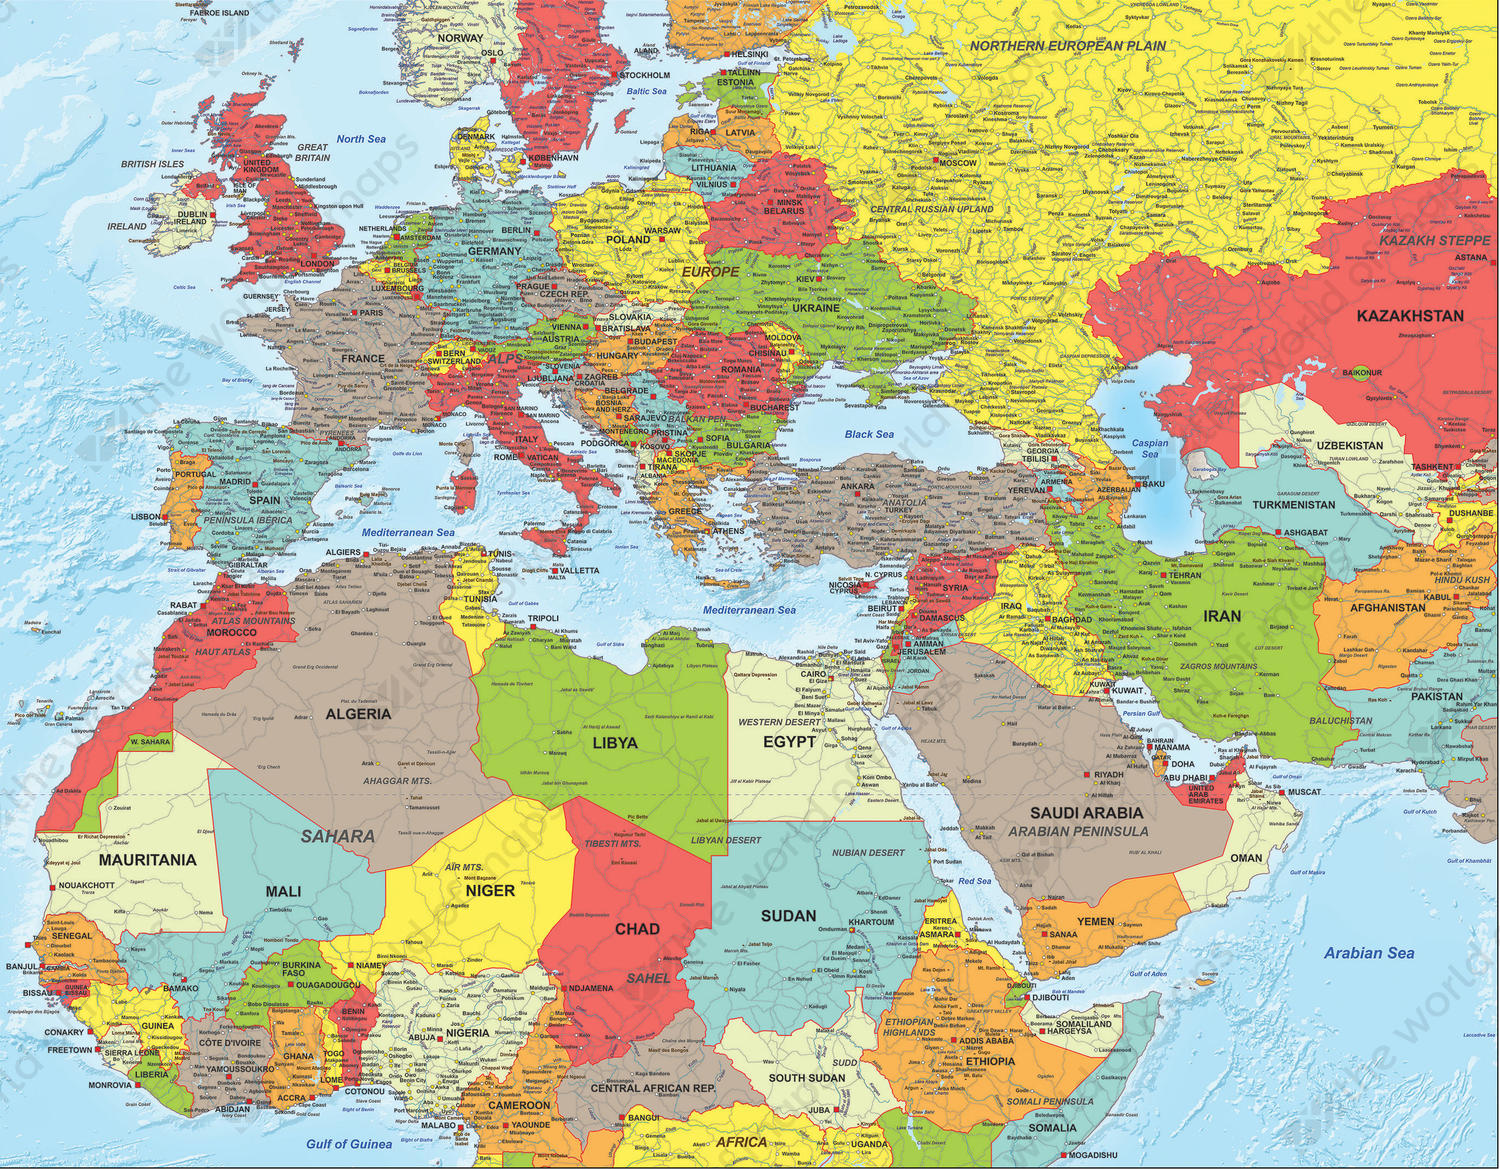 Digital Political Map North Africa Middle East And Europe 1317 The World Of Maps Com